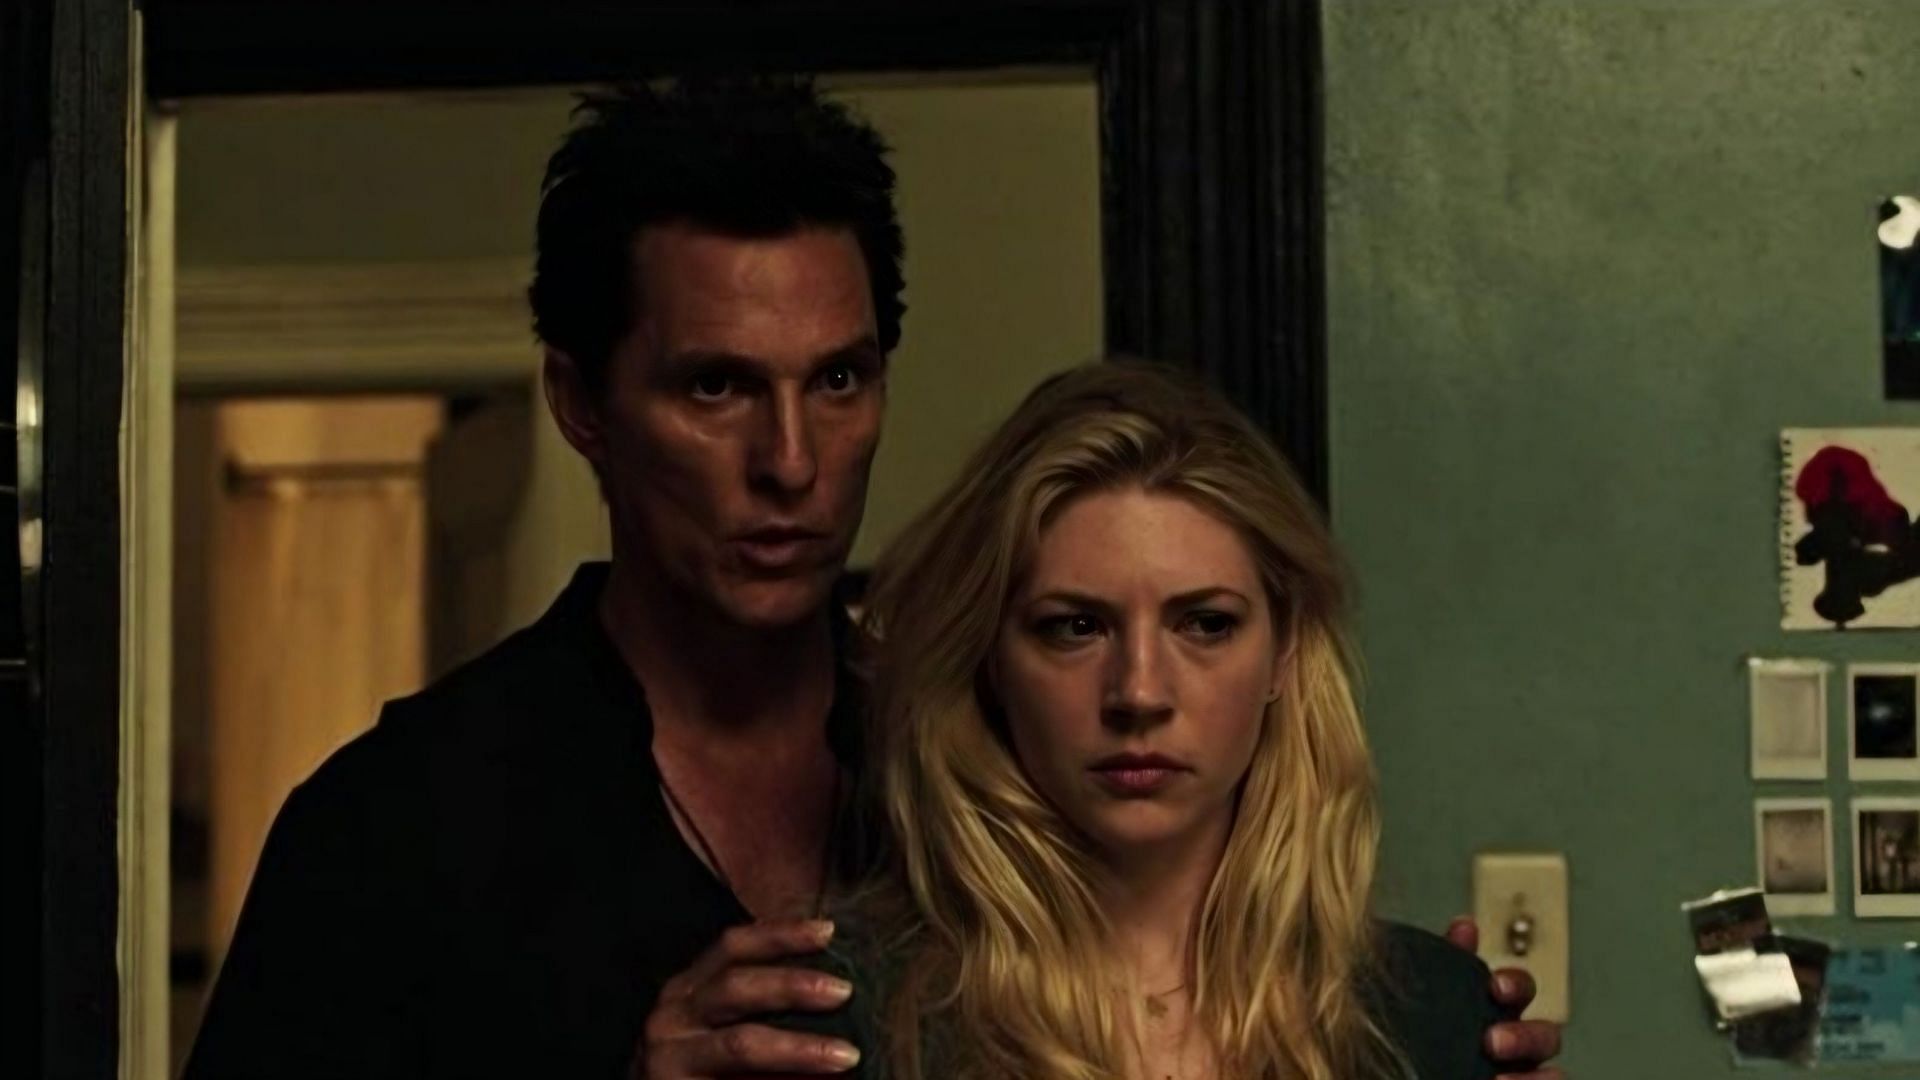 Matthew McConaughey and Katheryn Winnick in a scene from the film (Image via Sony Pictures Entertainment)